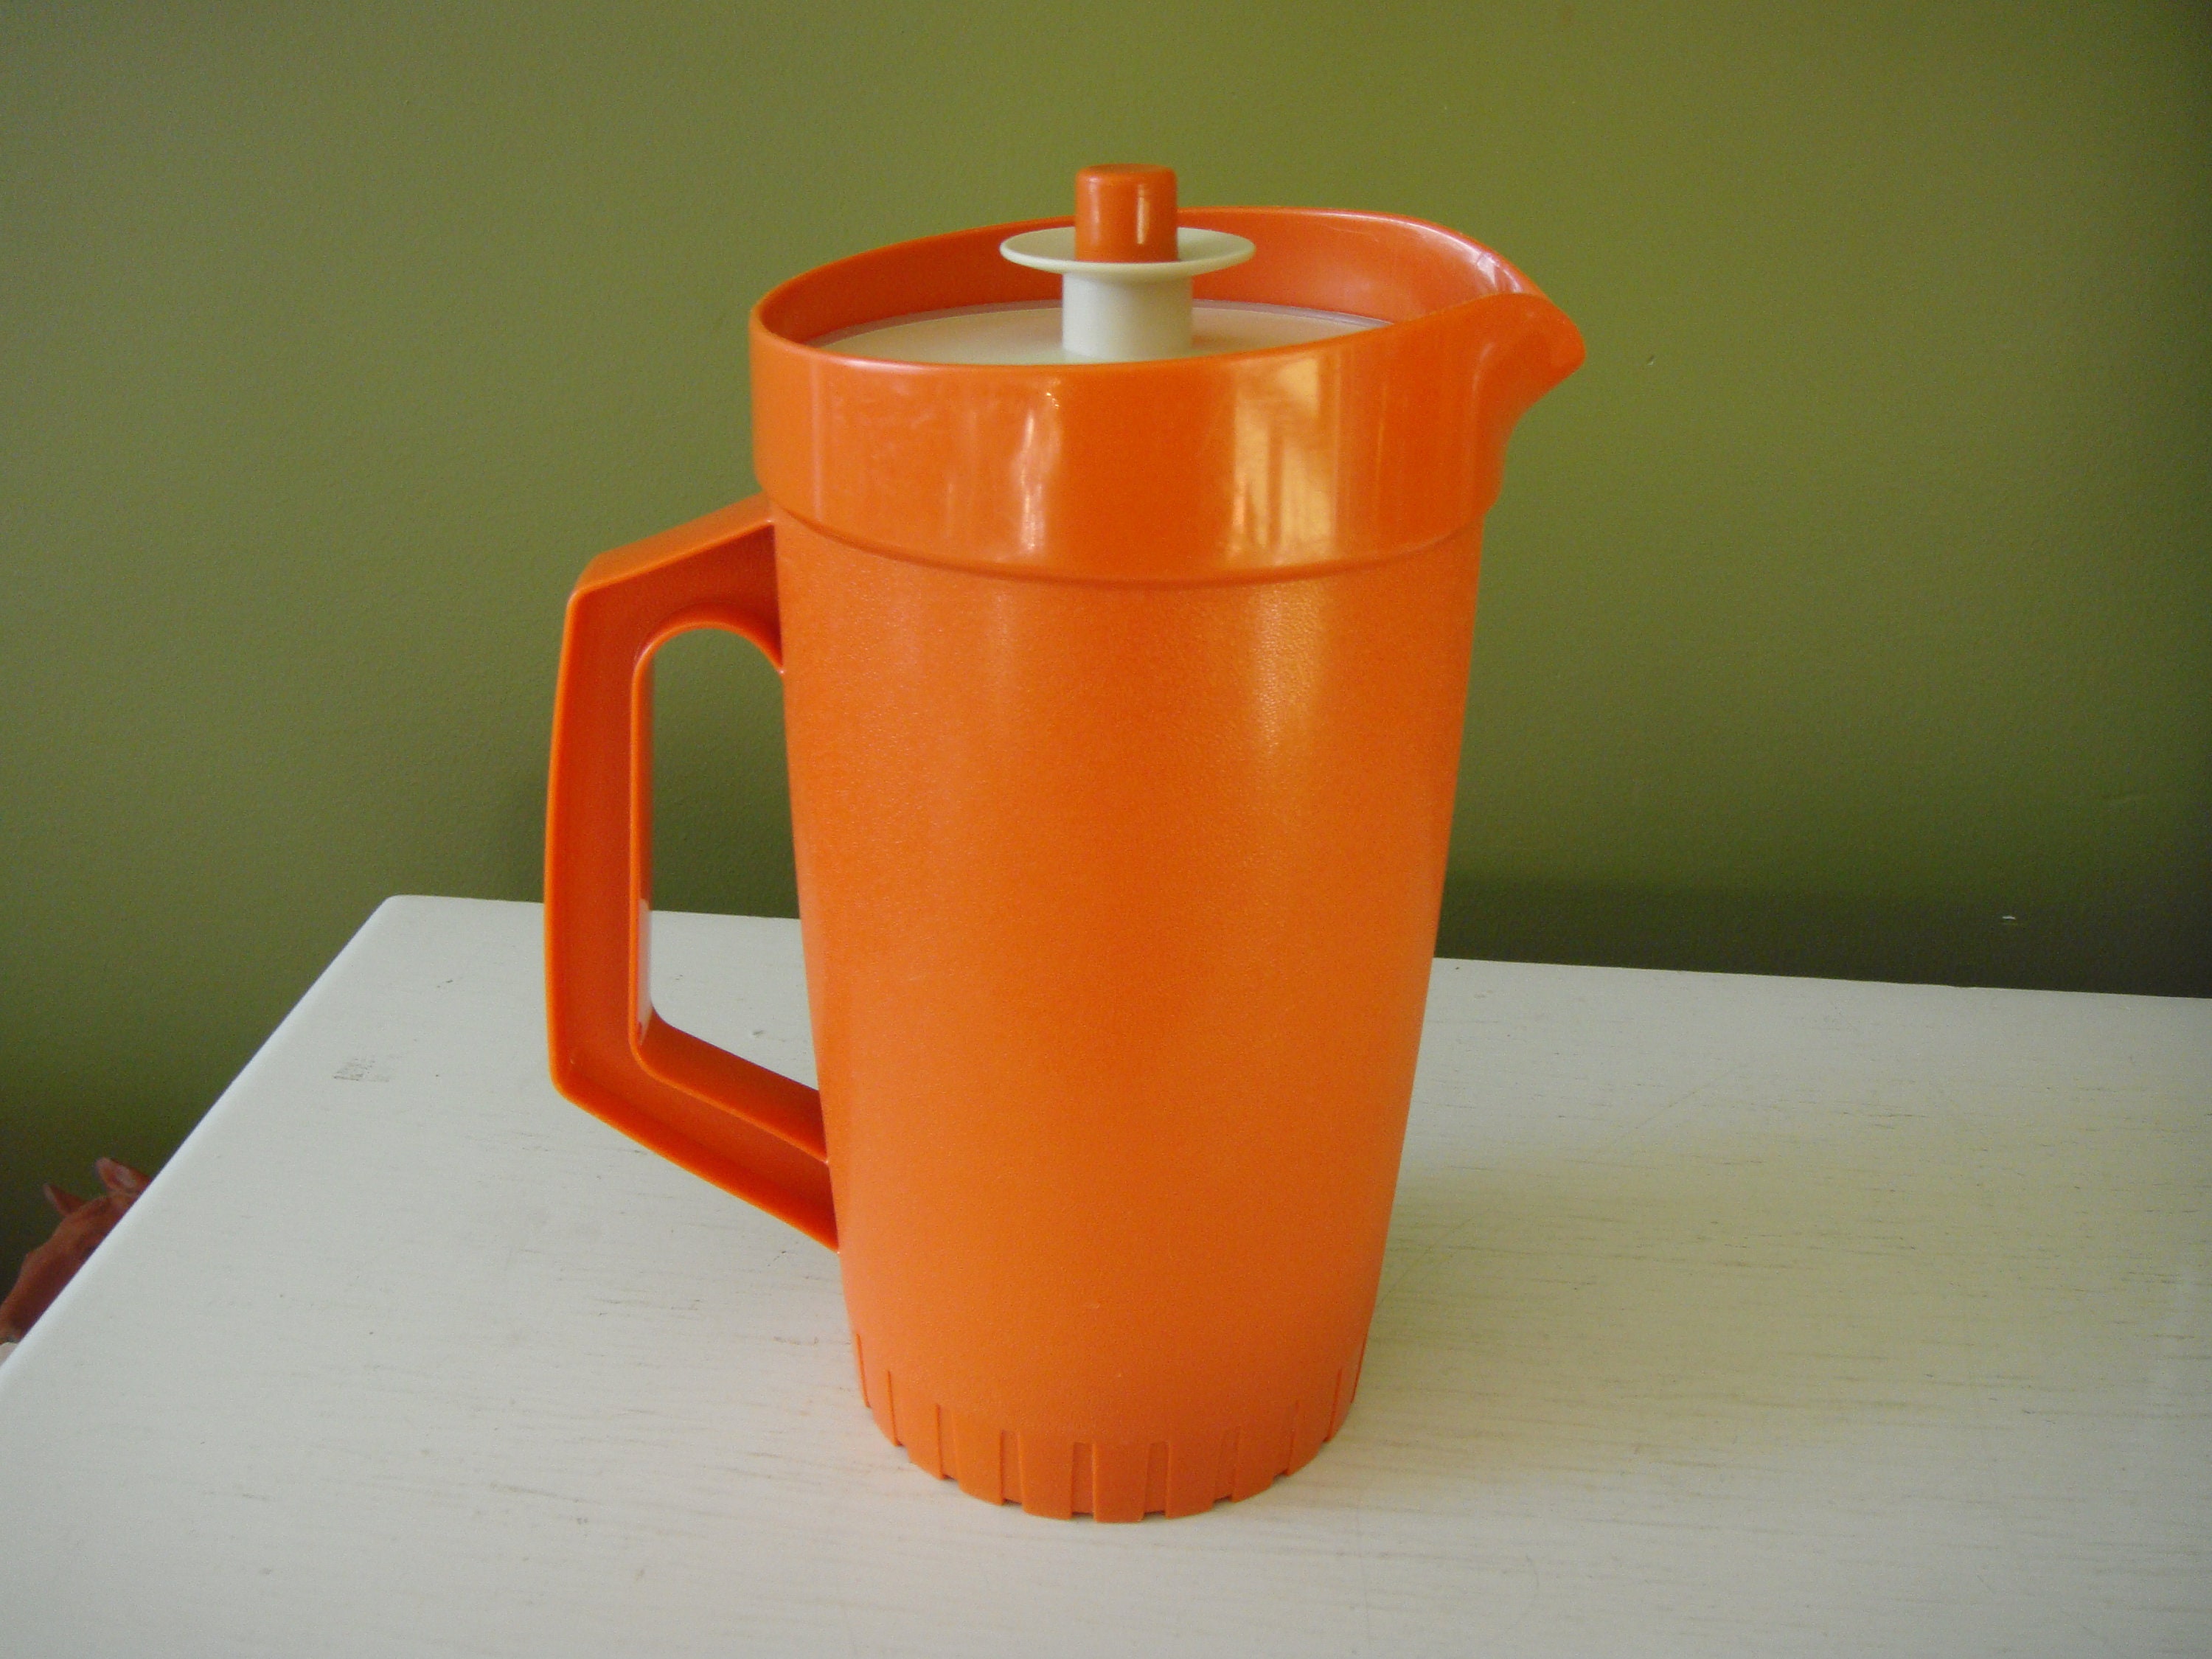 Vintage Tupperware Small Pitcher Red Push Button Top Frosted White Base  1681-3, Kitchen Must Have, Home Decor 